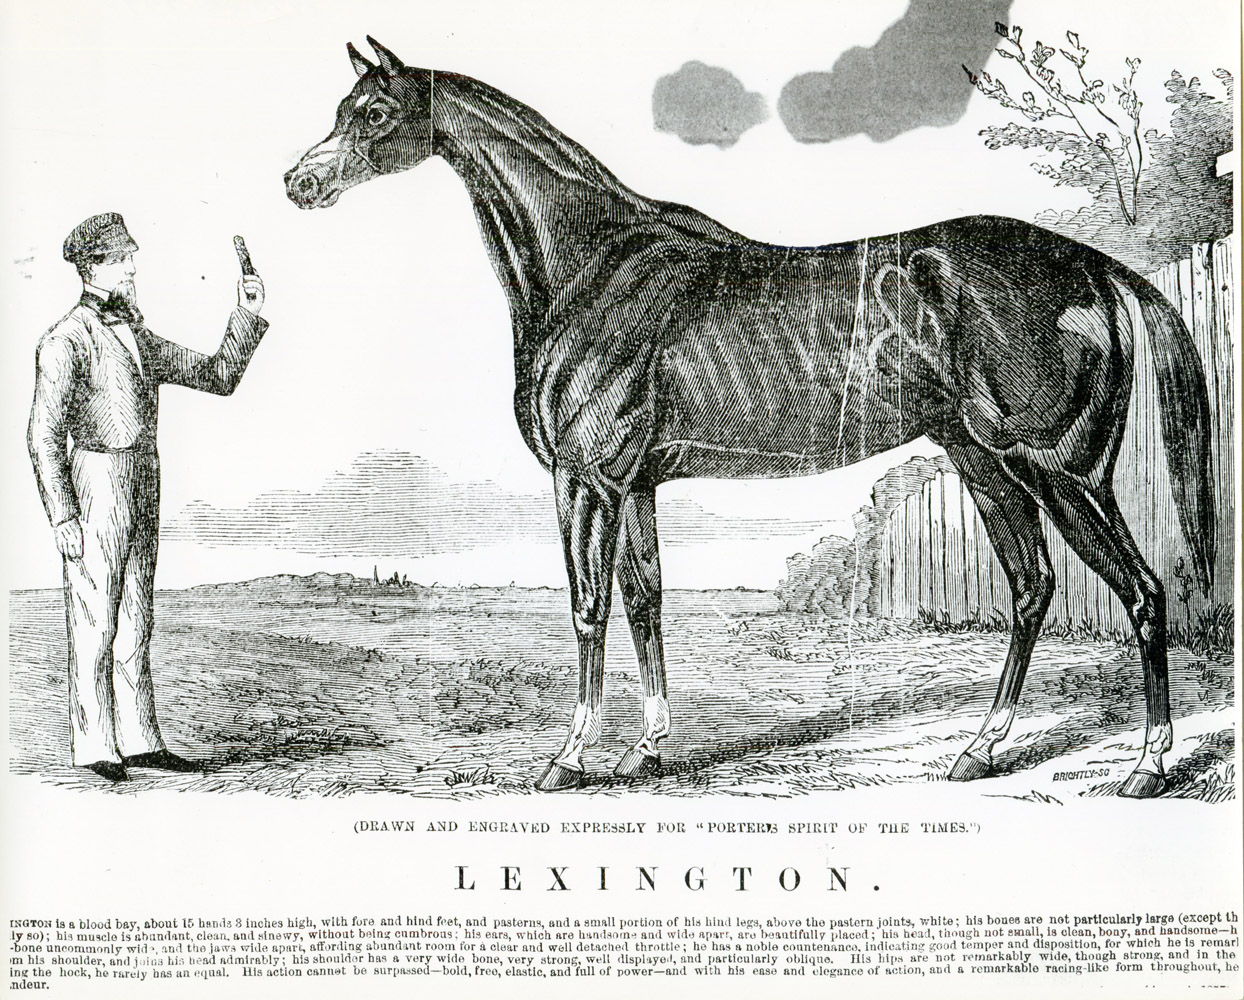 Illustration of Lexington from "The Spirit of the Times" (Museum Collection)